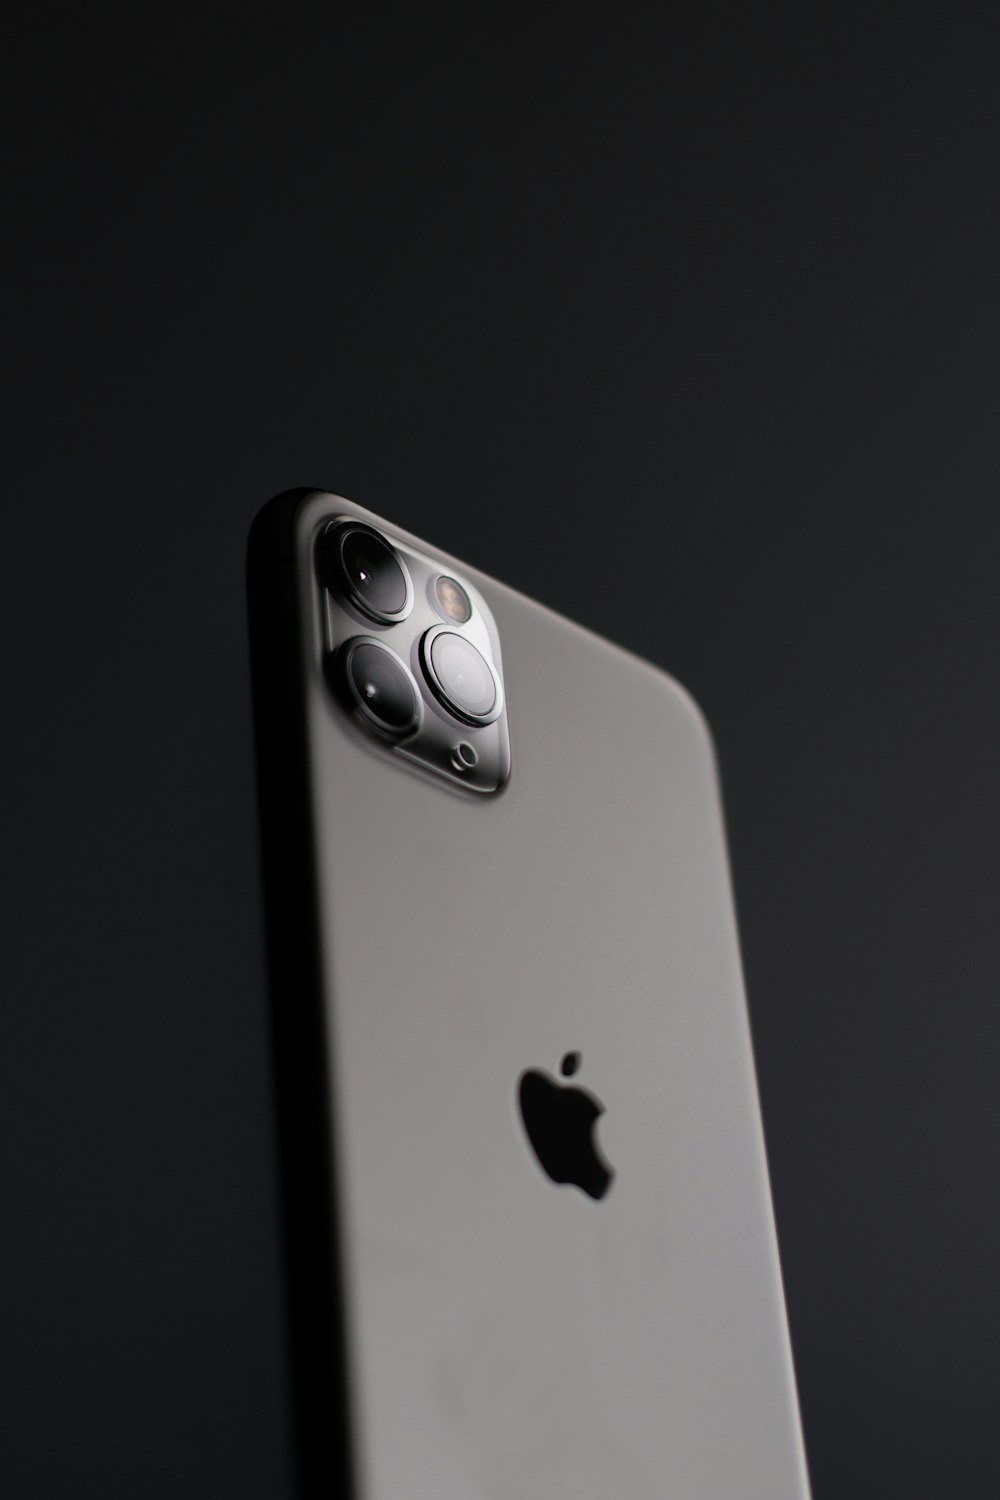 Iphone 11 Pro Pictures Download Free Images On Unsplash